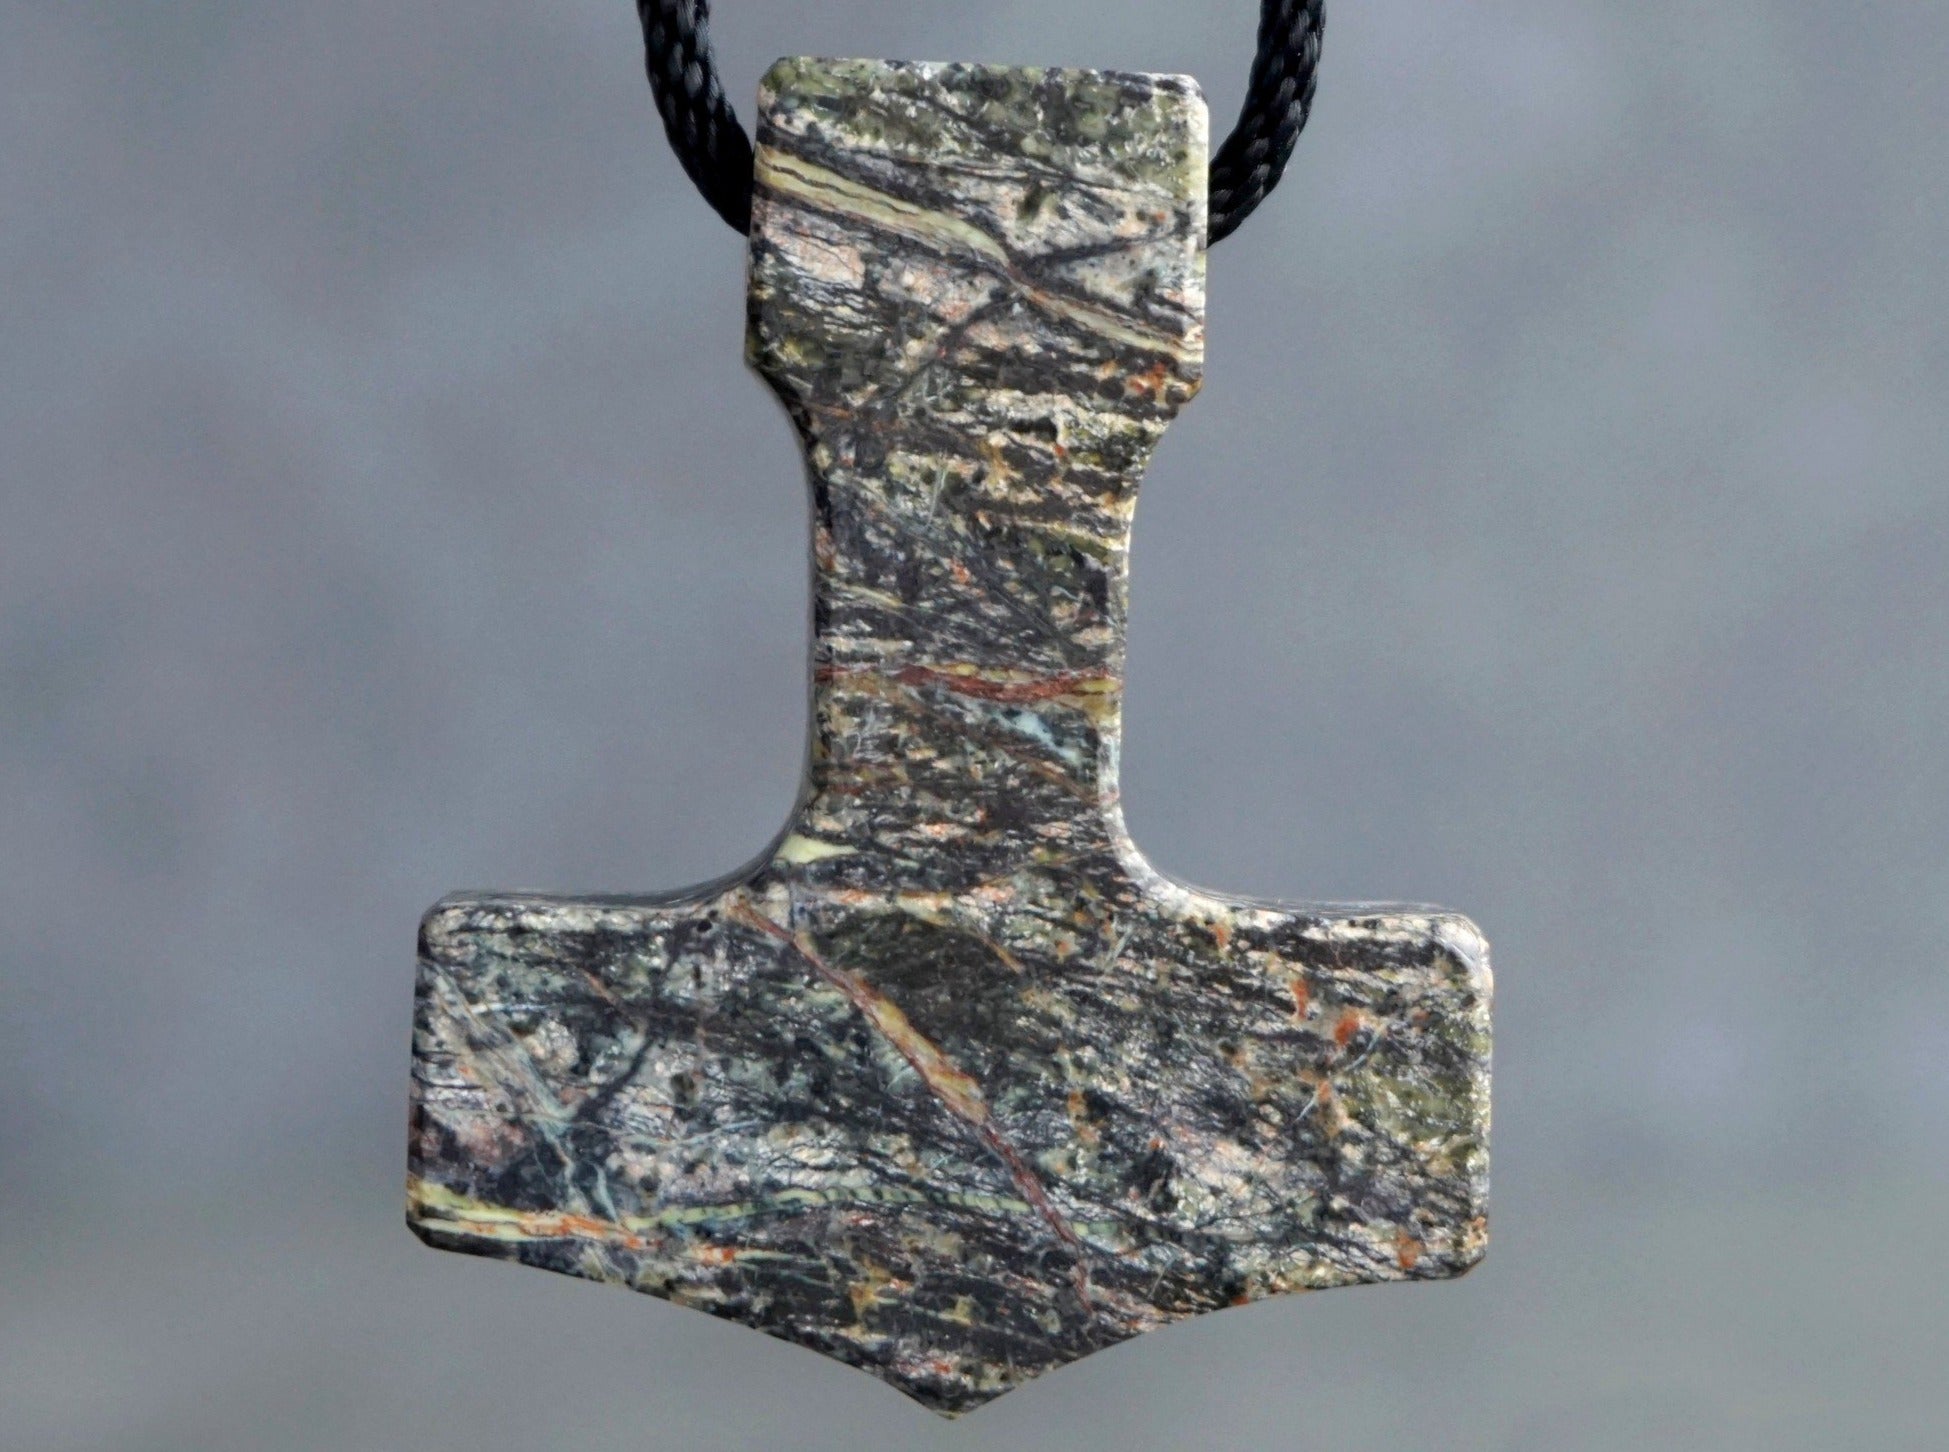 Thor's hammer amulet carved out of multicolored Serpentine stone